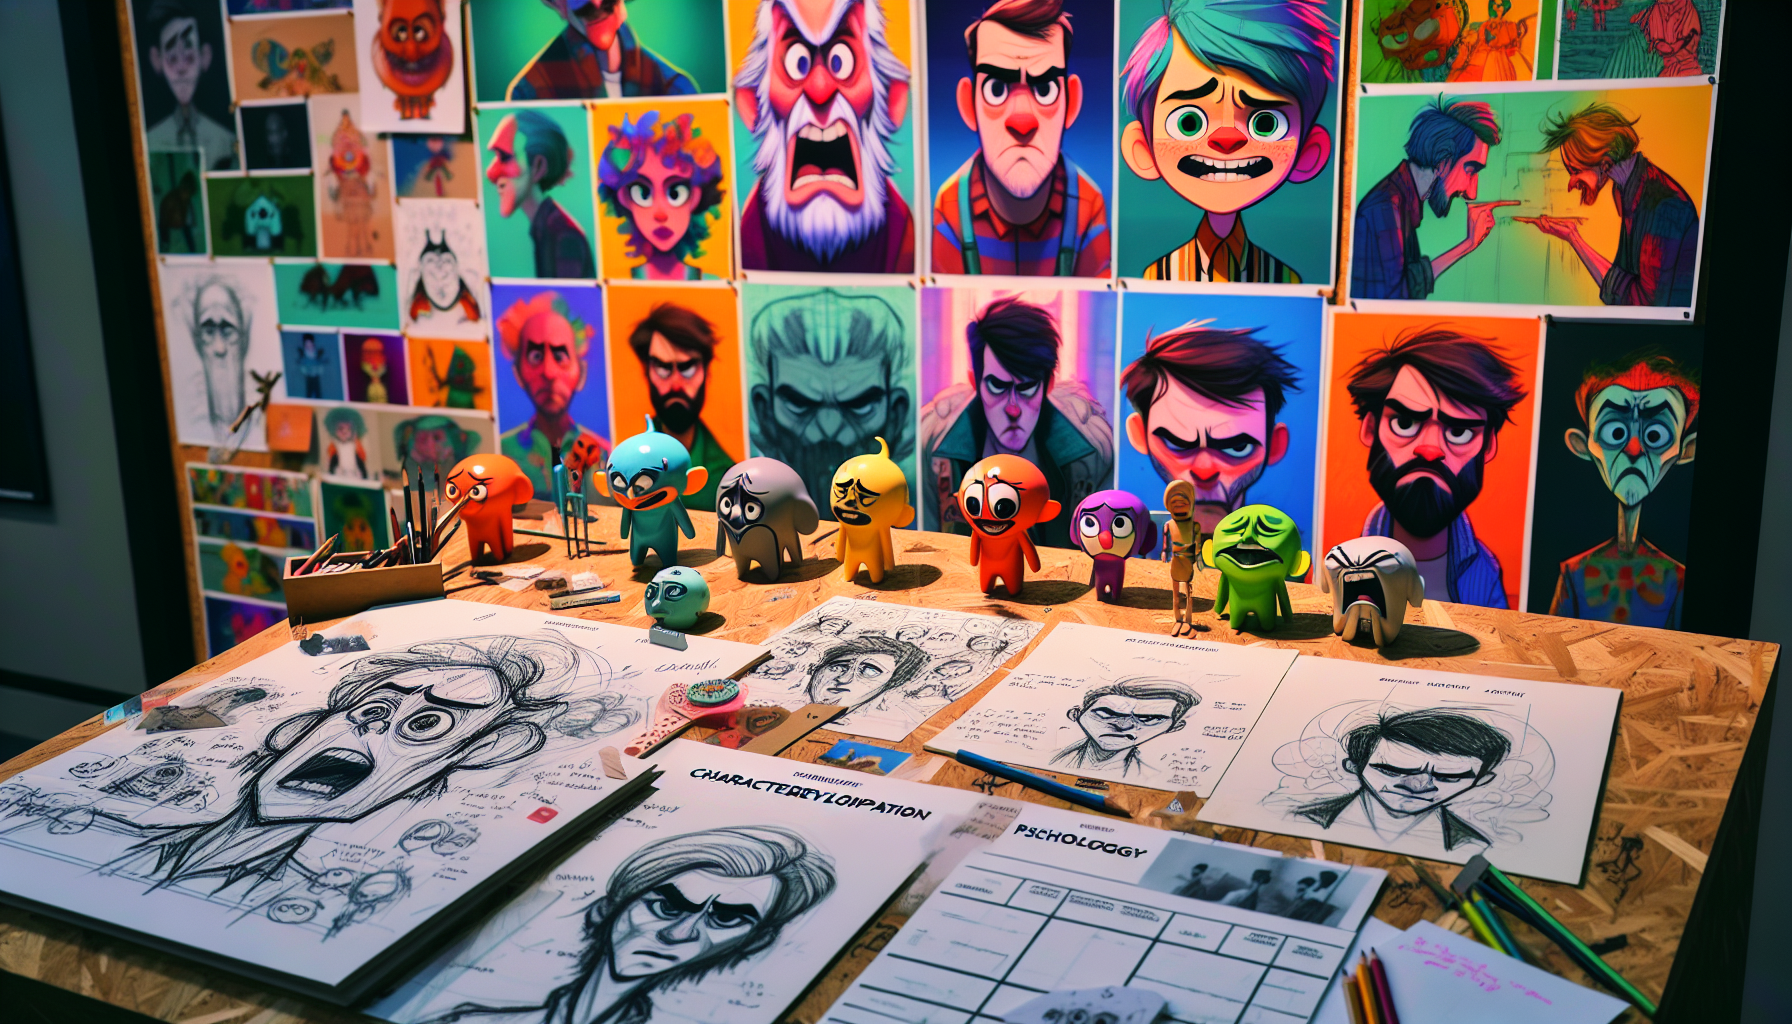 An animator's sketch-filled desk with drawings of diverse, expressive characters, each showing distinct emotions and personalities, surrounded by notes on character development and psychology, all set